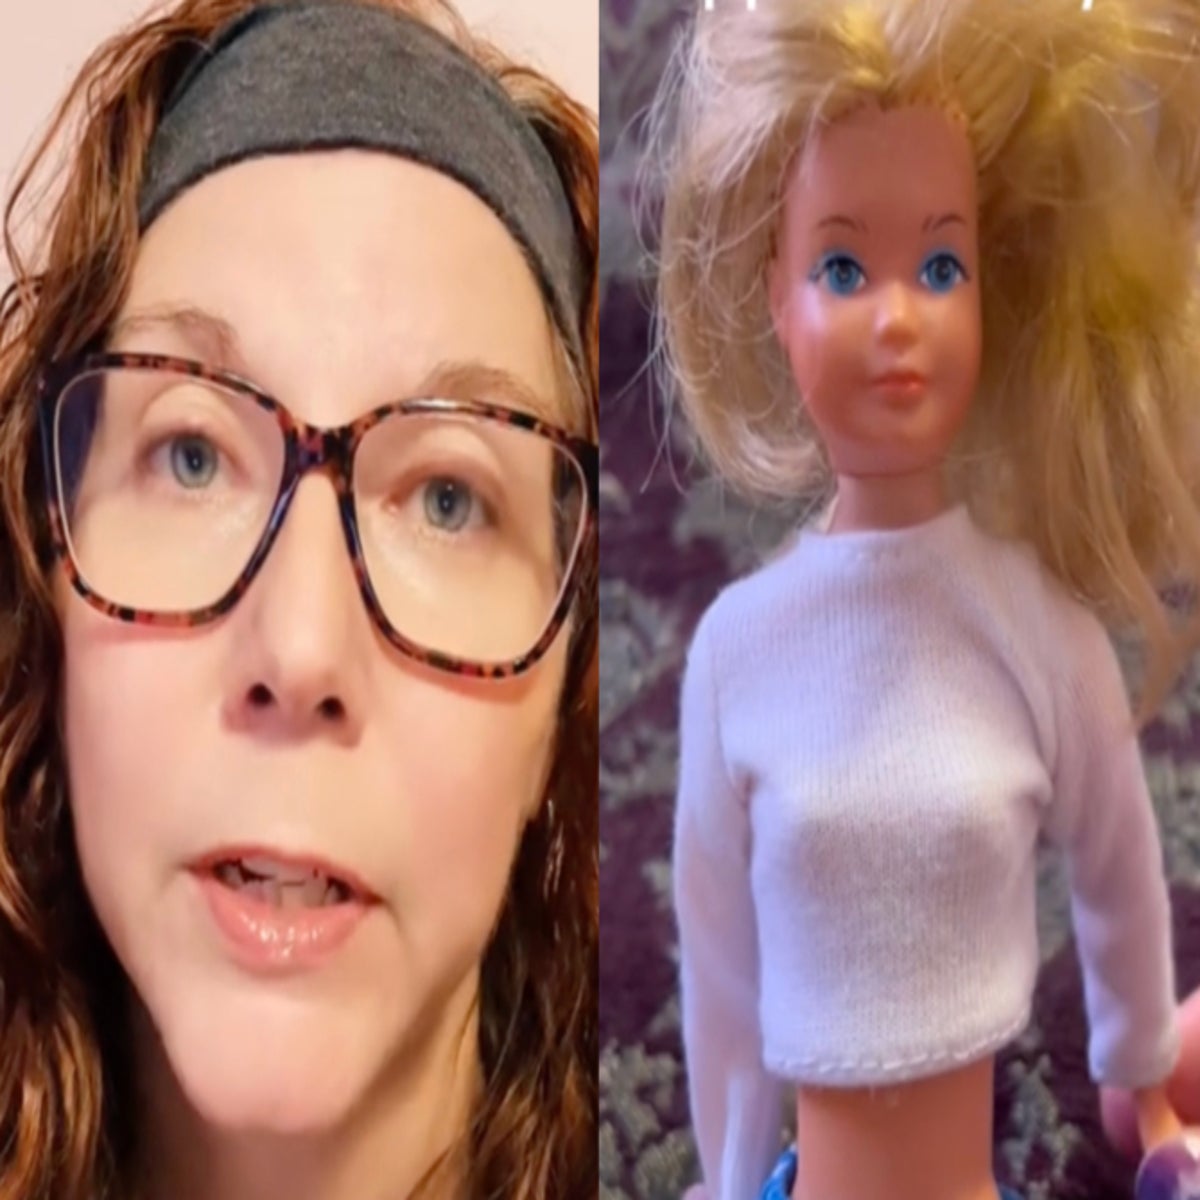 Woman demonstrates how Mattel's controversial 'Growing up Skipper